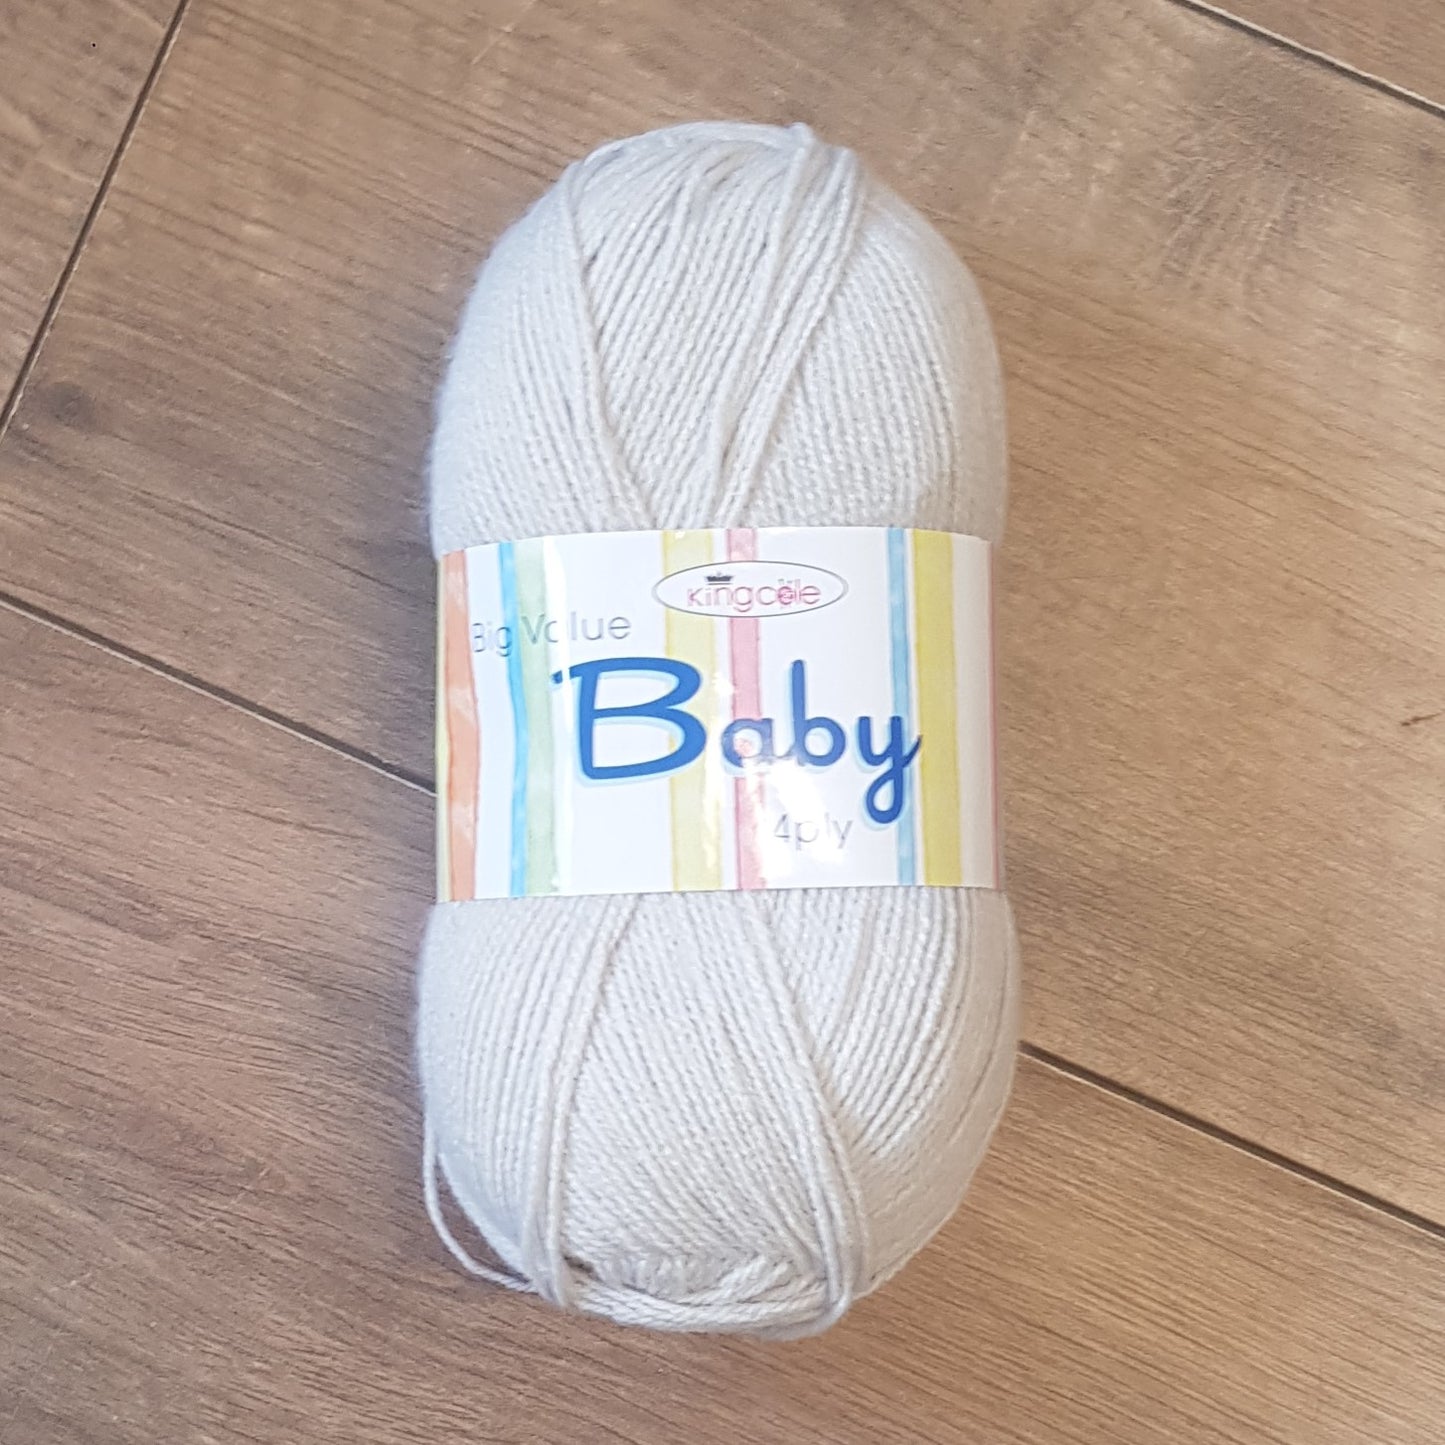 King Cole Big Value Baby 4ply Wool 100g - Various Shades